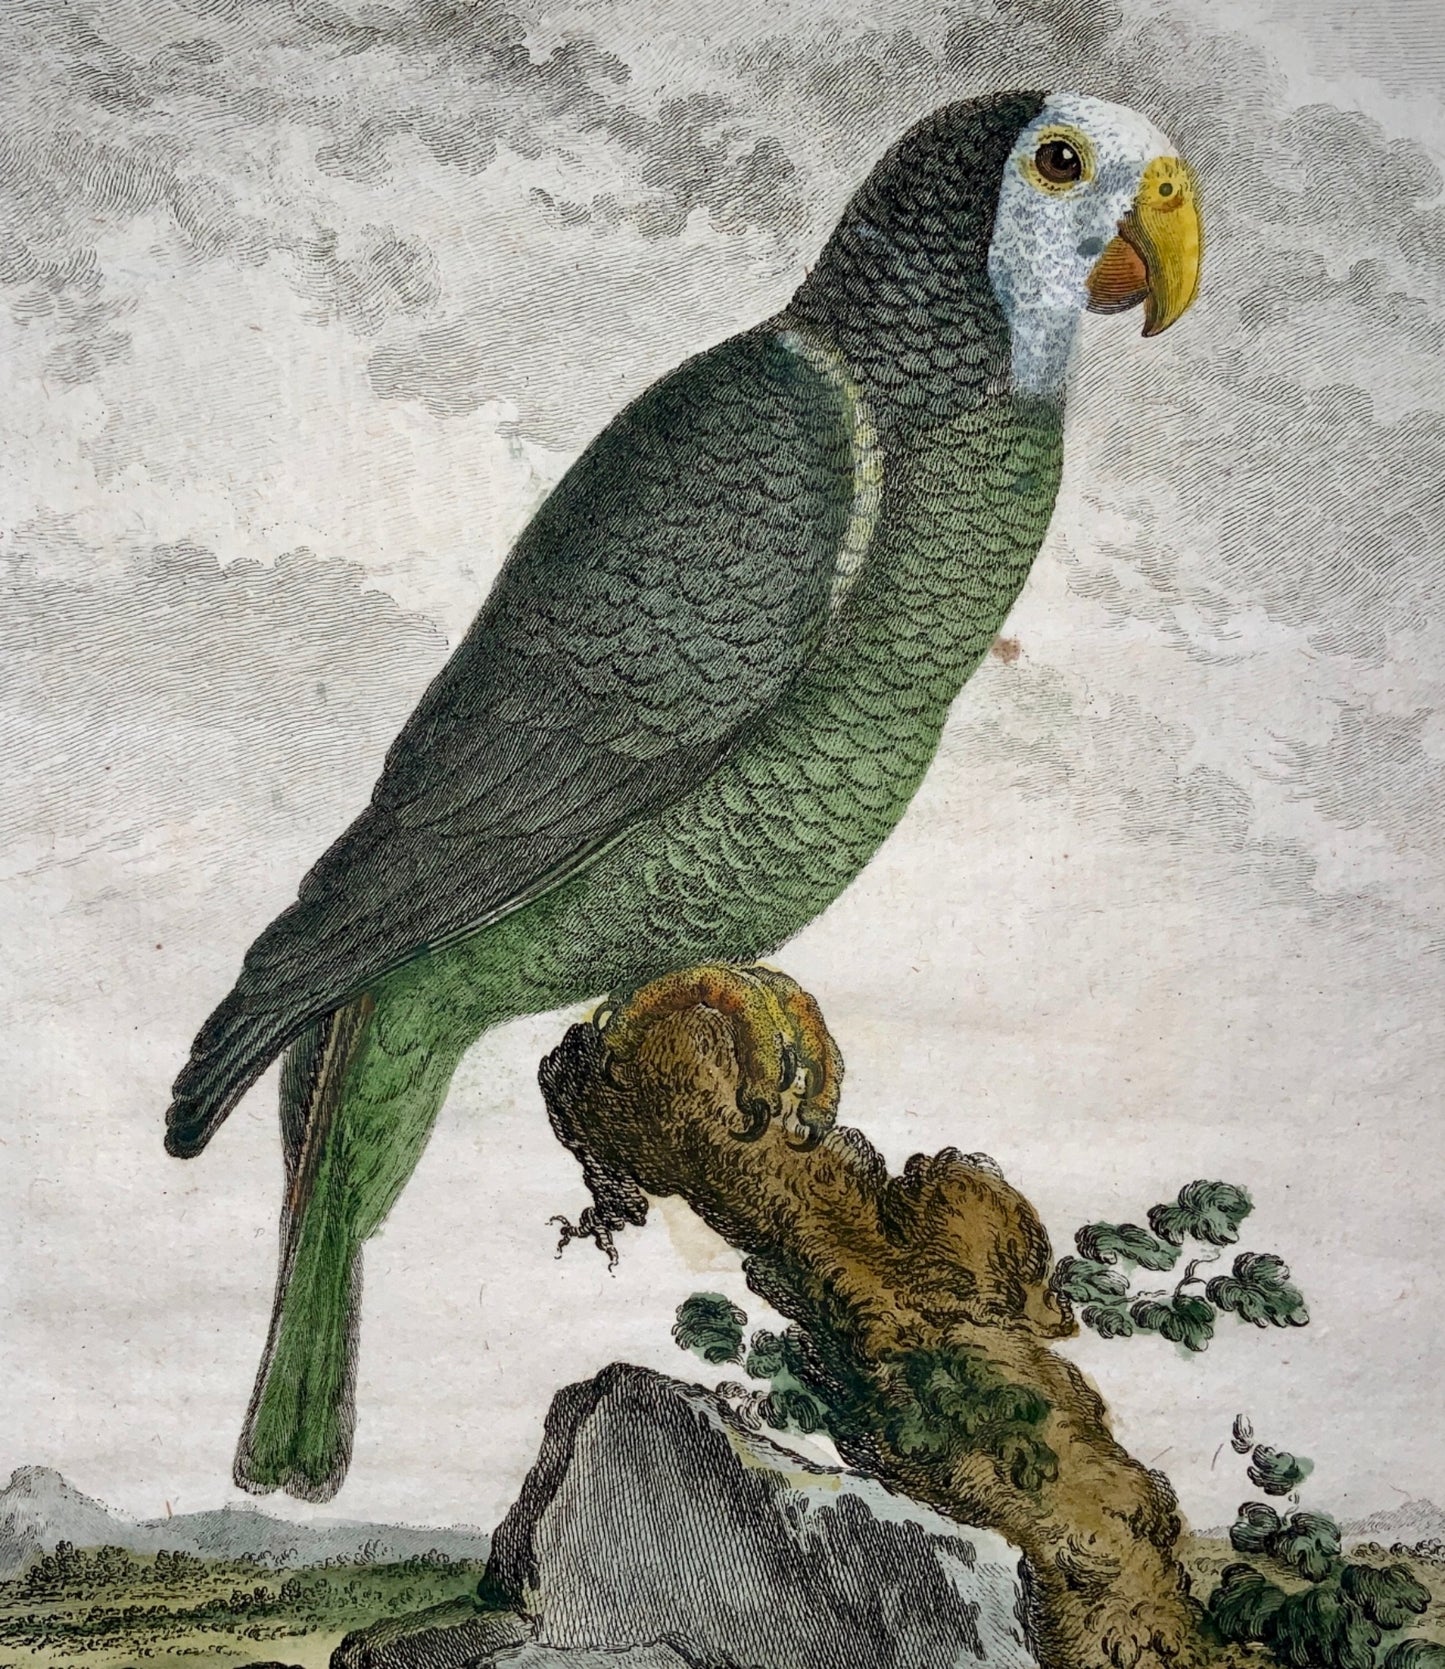 1779 Haussard after Jacques de Seve - The Green Macaw - Parrot - 4to engraving - Ornithology